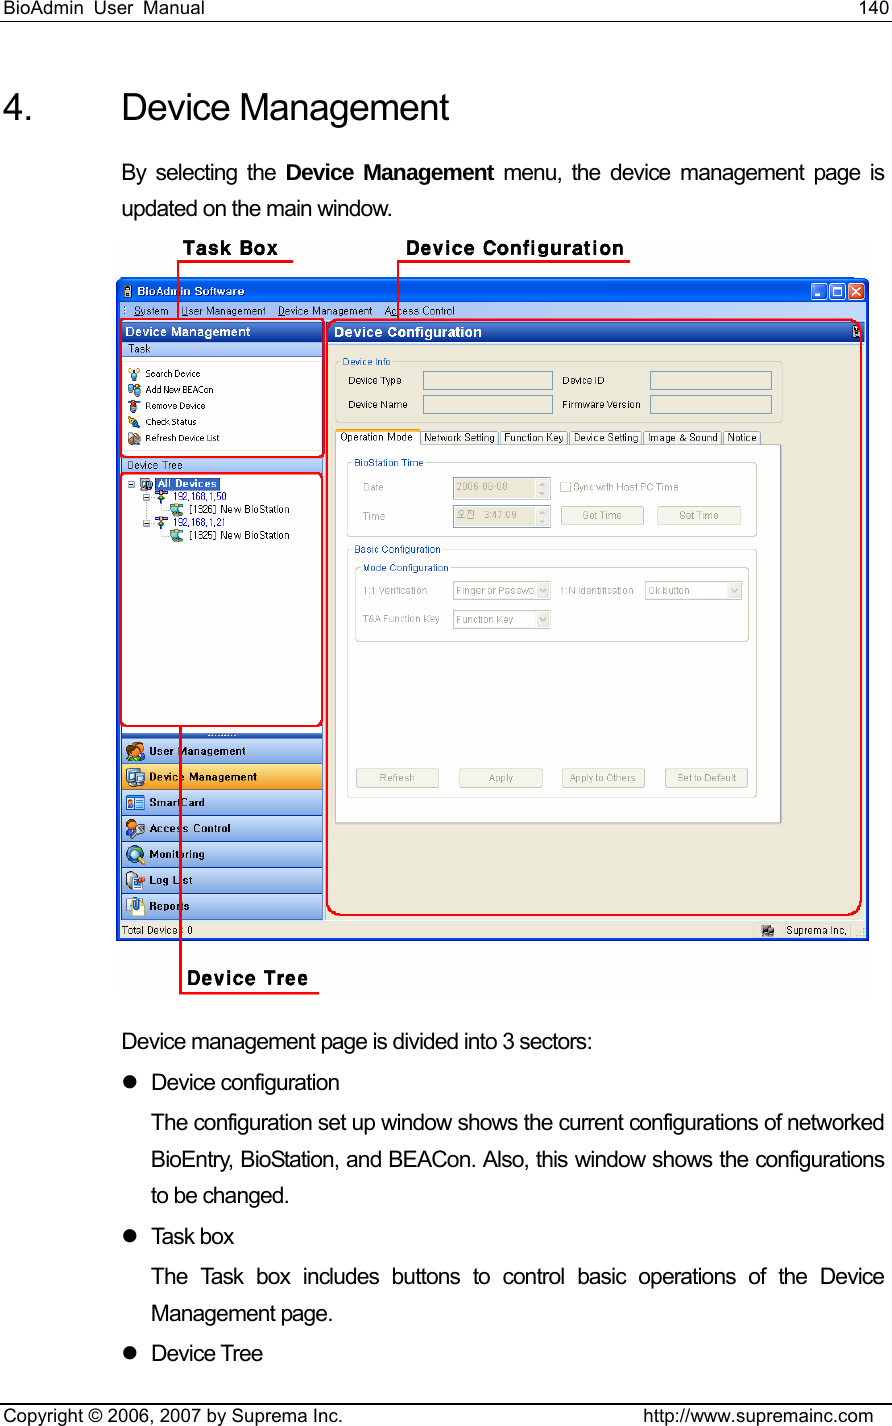 BioAdmin User Manual                                                                     140   Copyright © 2006, 2007 by Suprema Inc.                                http://www.supremainc.com 4. Device Management  By selecting the Device Management menu, the device management page is updated on the main window.  Device management page is divided into 3 sectors: z Device configuration The configuration set up window shows the current configurations of networked BioEntry, BioStation, and BEACon. Also, this window shows the configurations to be changed.   z Task box The Task box includes buttons to control basic operations of the Device Management page.   z Device Tree 